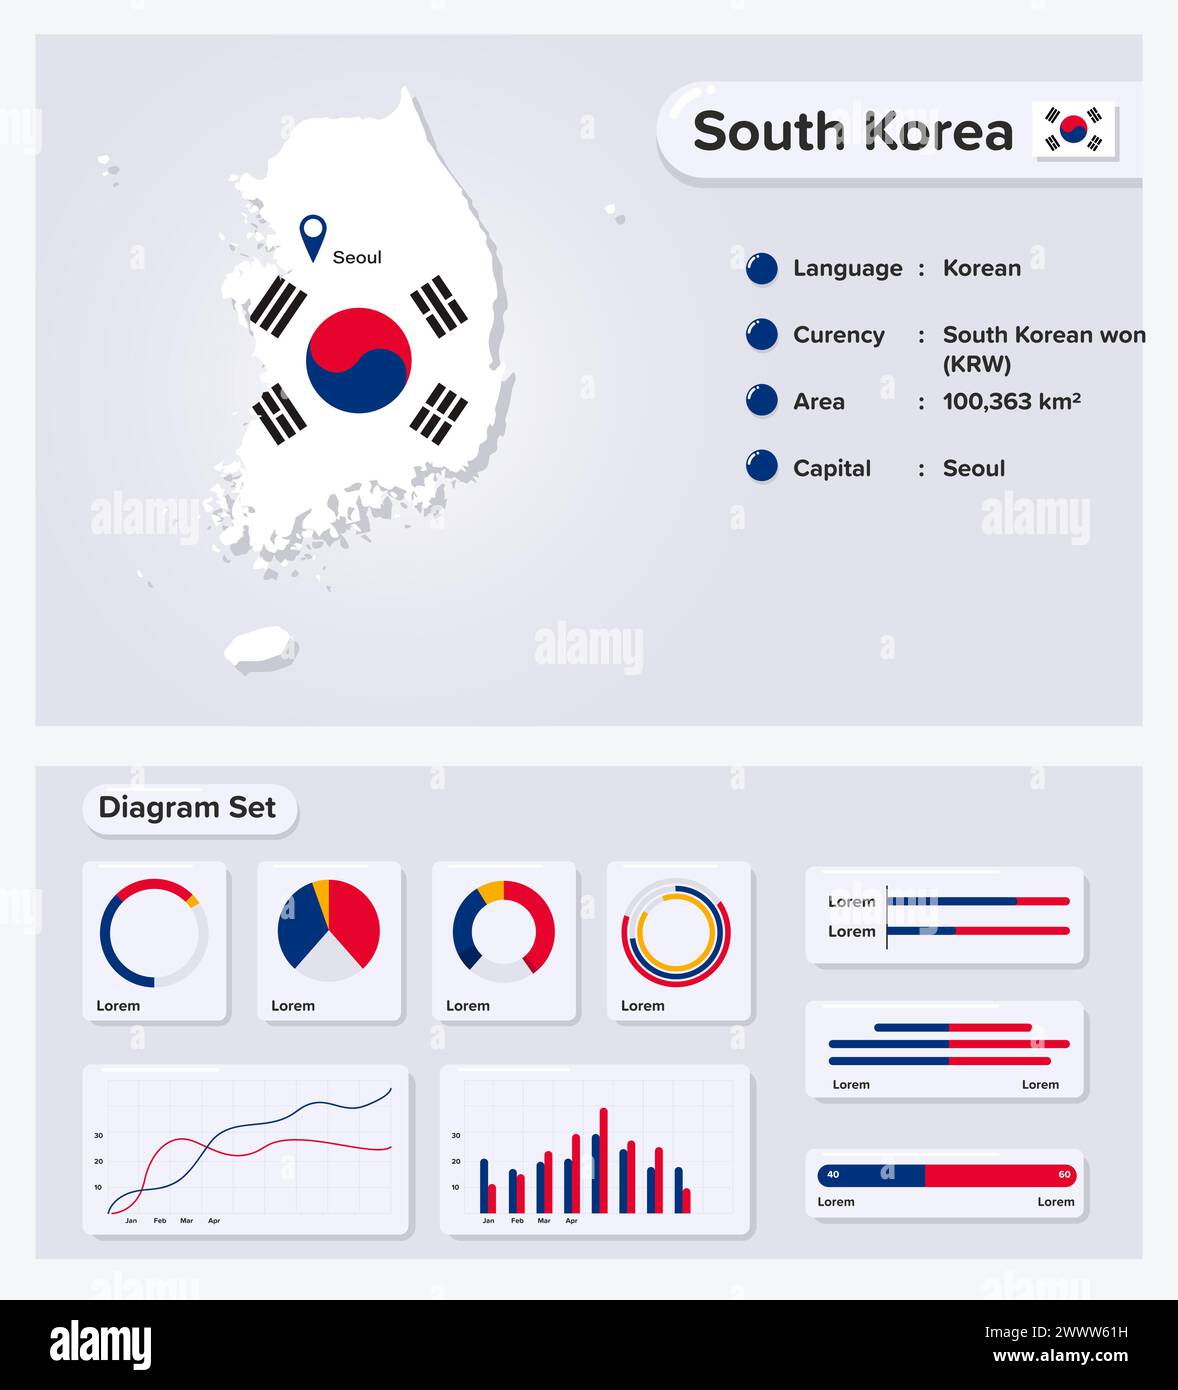 Republic Of South Korea Infographic Vector Illustration, South Korea Statistical Data Element, Information Board With Flag Map,South Korea Map Flag Wi Stock Vector